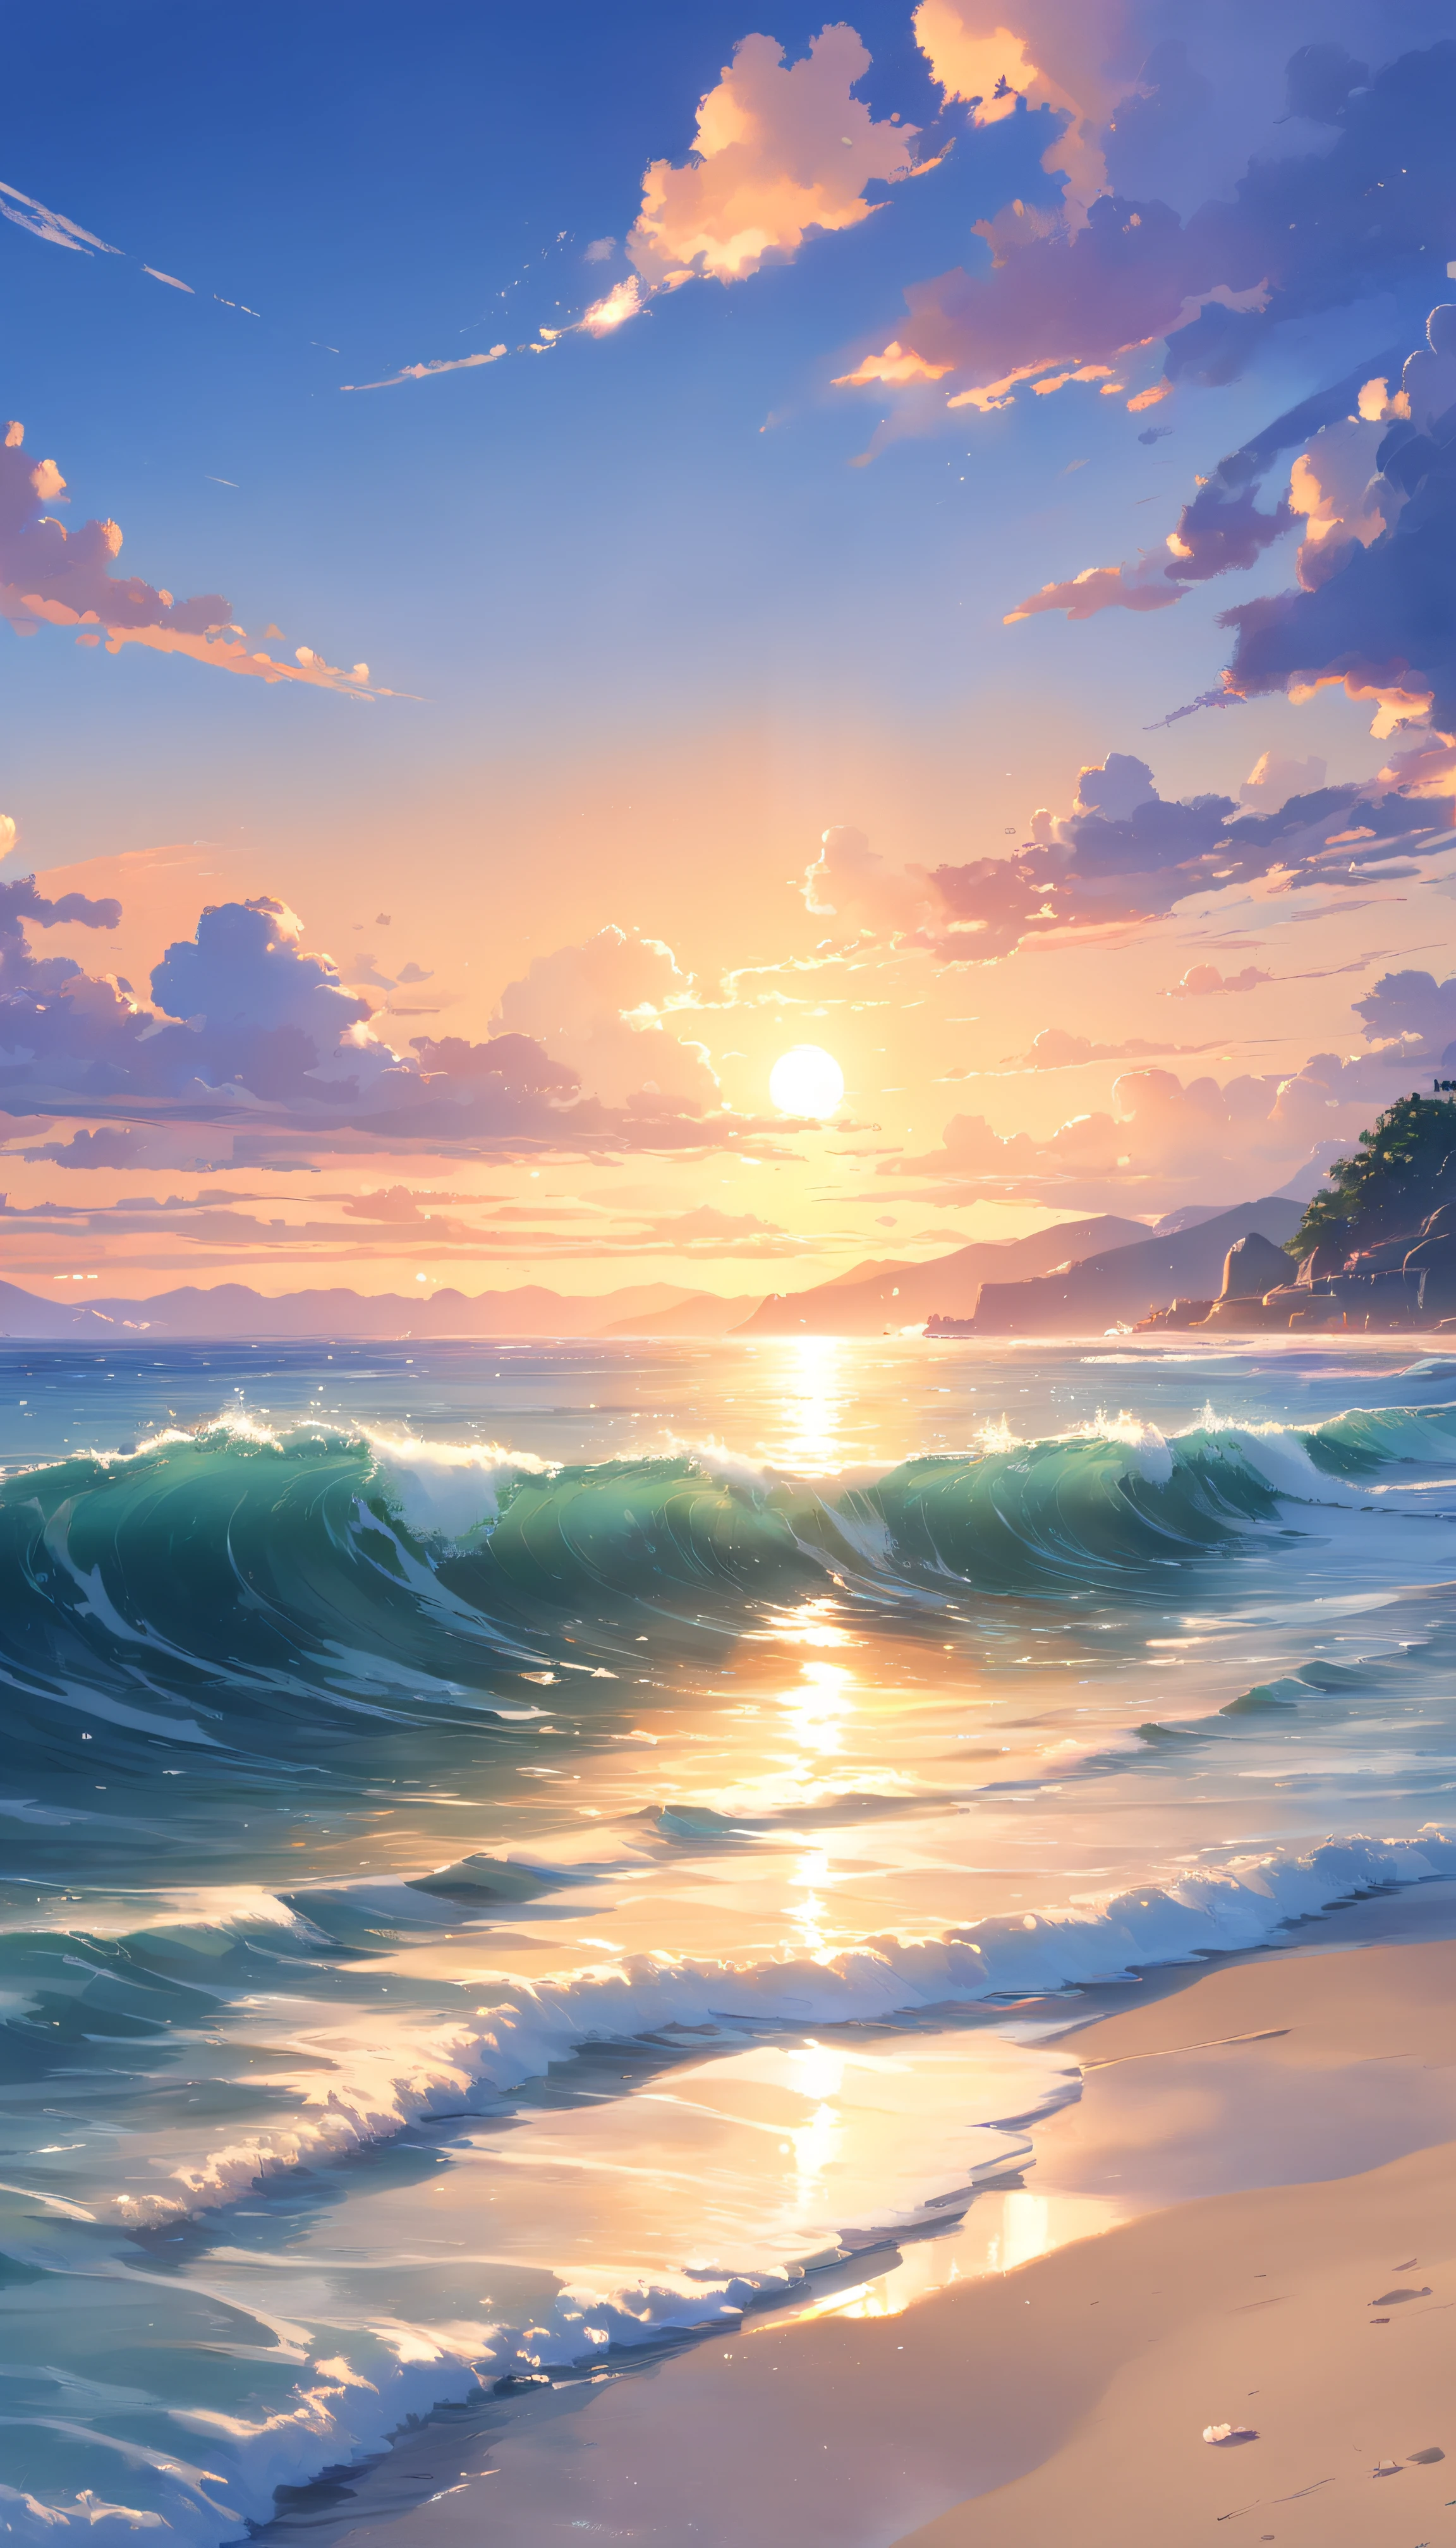 (best quality,4k,8k,highres,masterpiece:1.2),ultra-detailed,(realistic,photorealistic,photo-realistic:1.37),vivid colors,ocean sunset,beautiful detailed waves,reflecting sun rays,magnificent clouds,dramatic sky,silhouette of a lone sailboat,spectacular horizon,glowing orange and purple hues,serene atmosphere,soft gently lapping waves,peaceful and tranquil scene,sparkling sunlight on the water,serene and calm ambiance,ethereal beauty,with a touch of romance,mesmerizing view of the setting sun,ocean breeze,tidal waves crashing against the shore,majestic and awe-inspiring scenery,serenity and tranquility,seagulls flying in the distance,seamless transition from day to night,serene stillness of the ocean,rippling water creating a dreamy effect,soft glowing light illuminating the scene,serene and magical setting,secluded and untouched beach